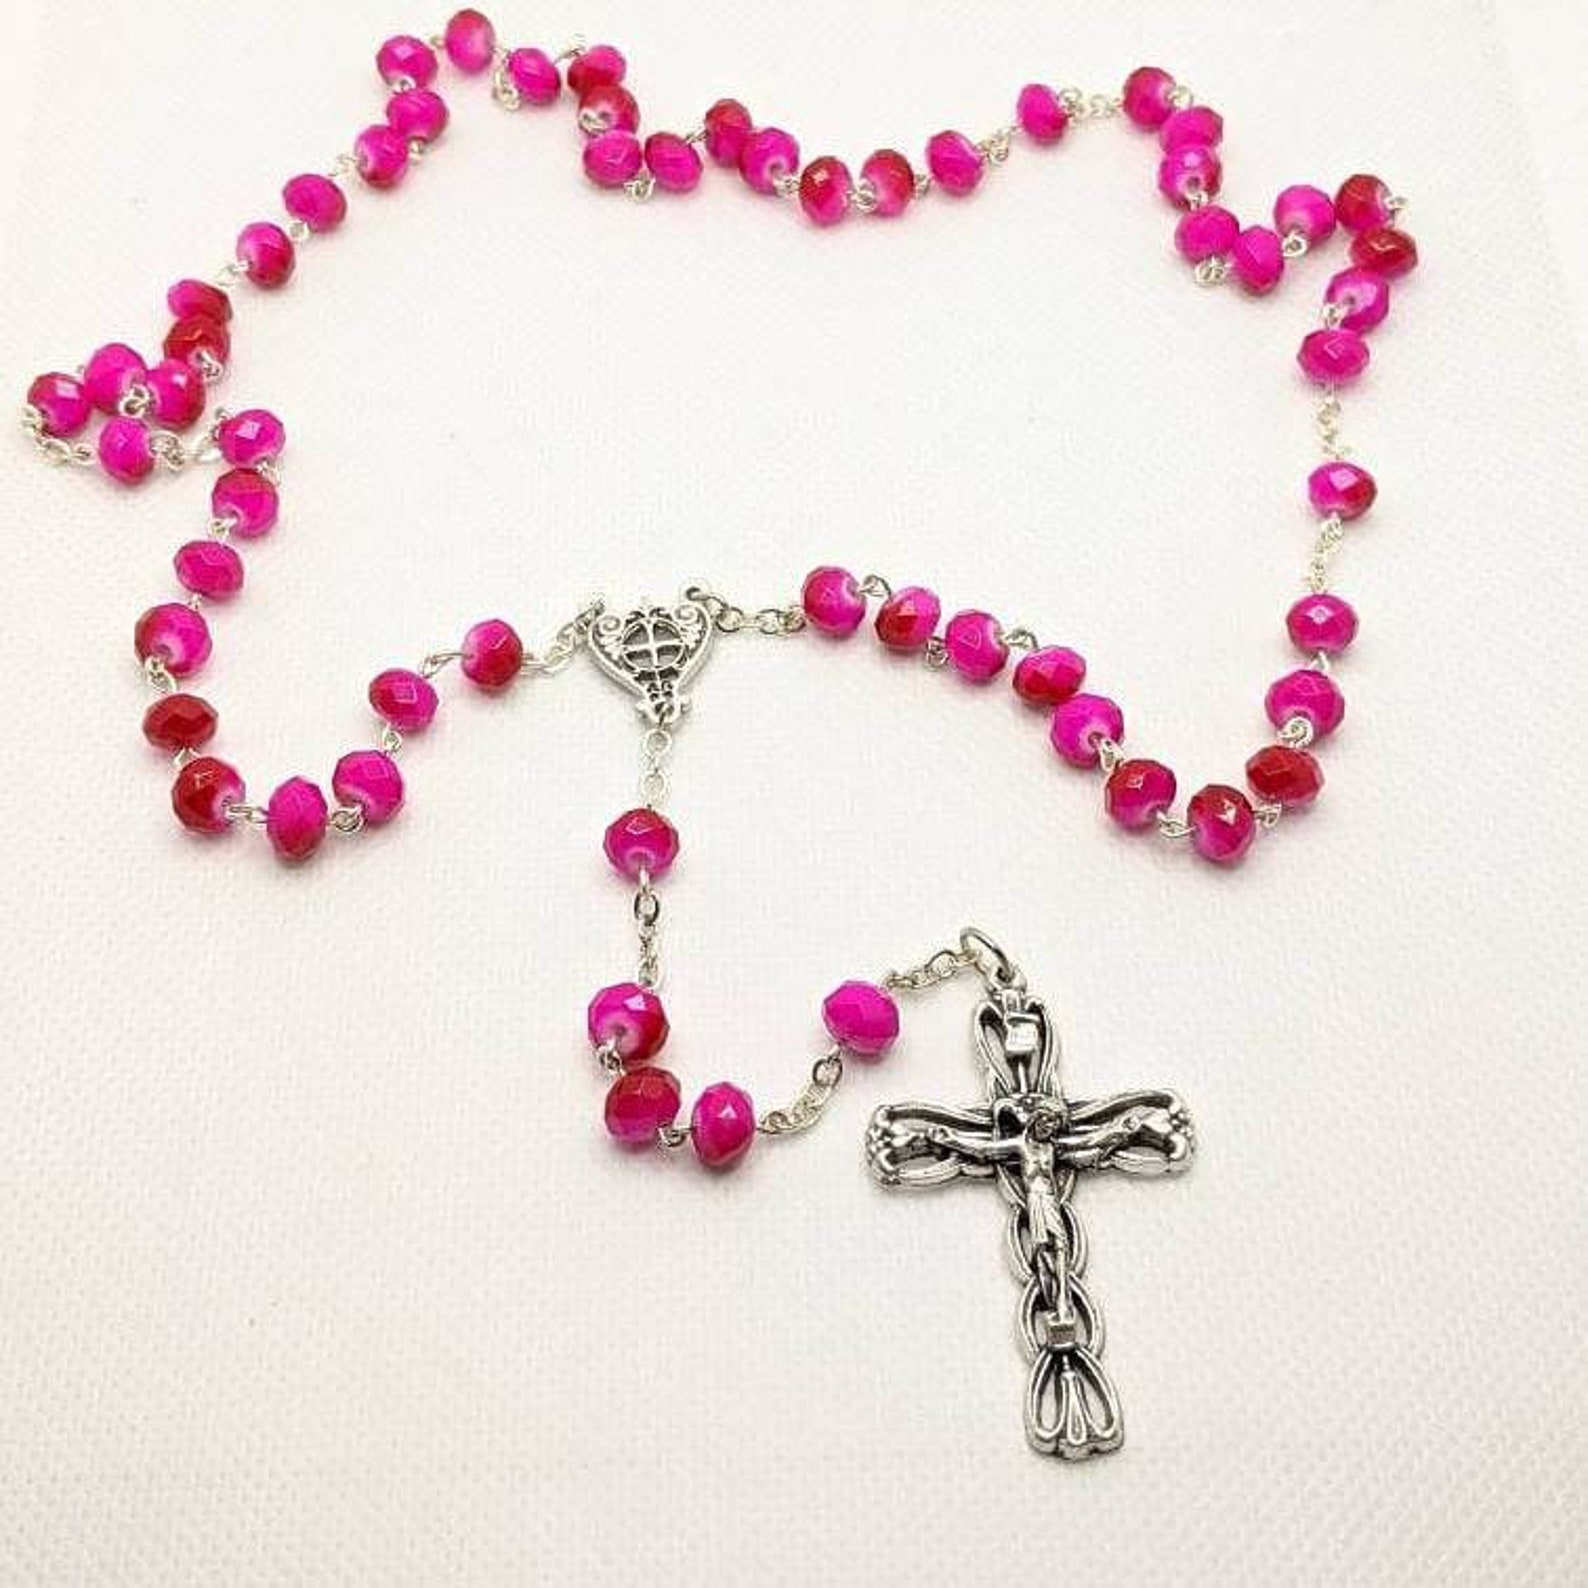 Create Your Own One Color Rosary | Etsy